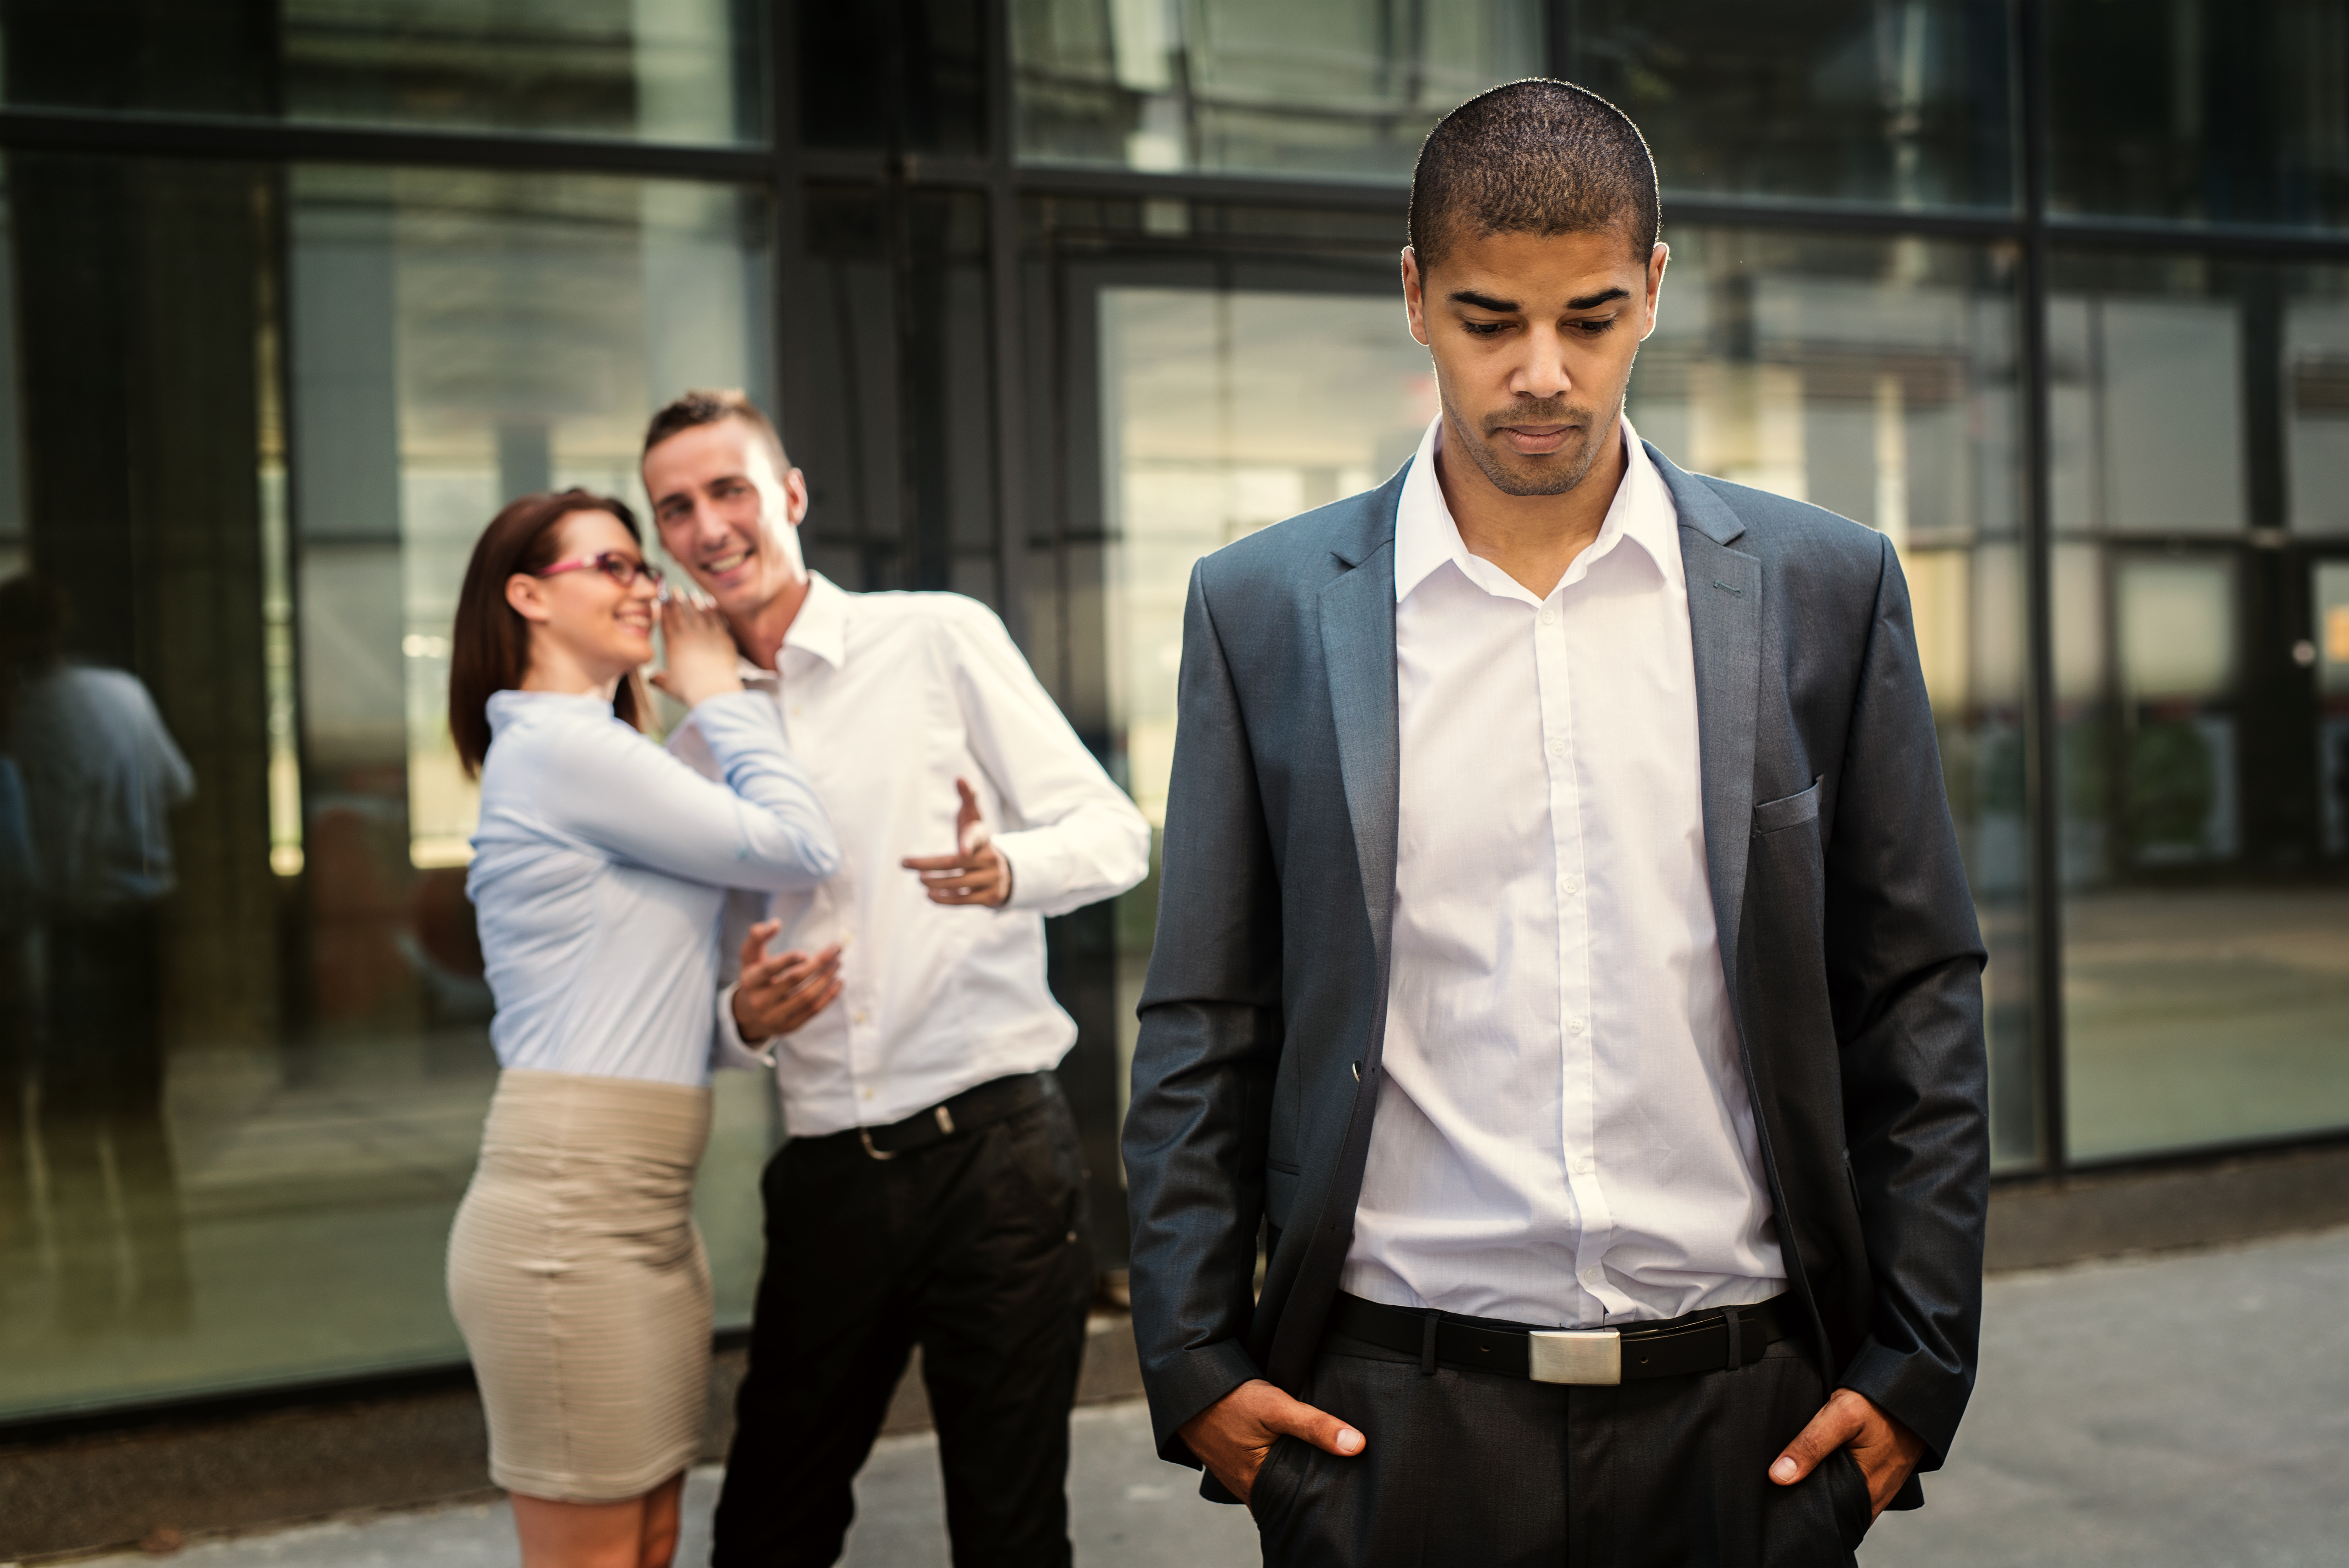 3 Ways to Determine if You Have A Hostile Work Environment